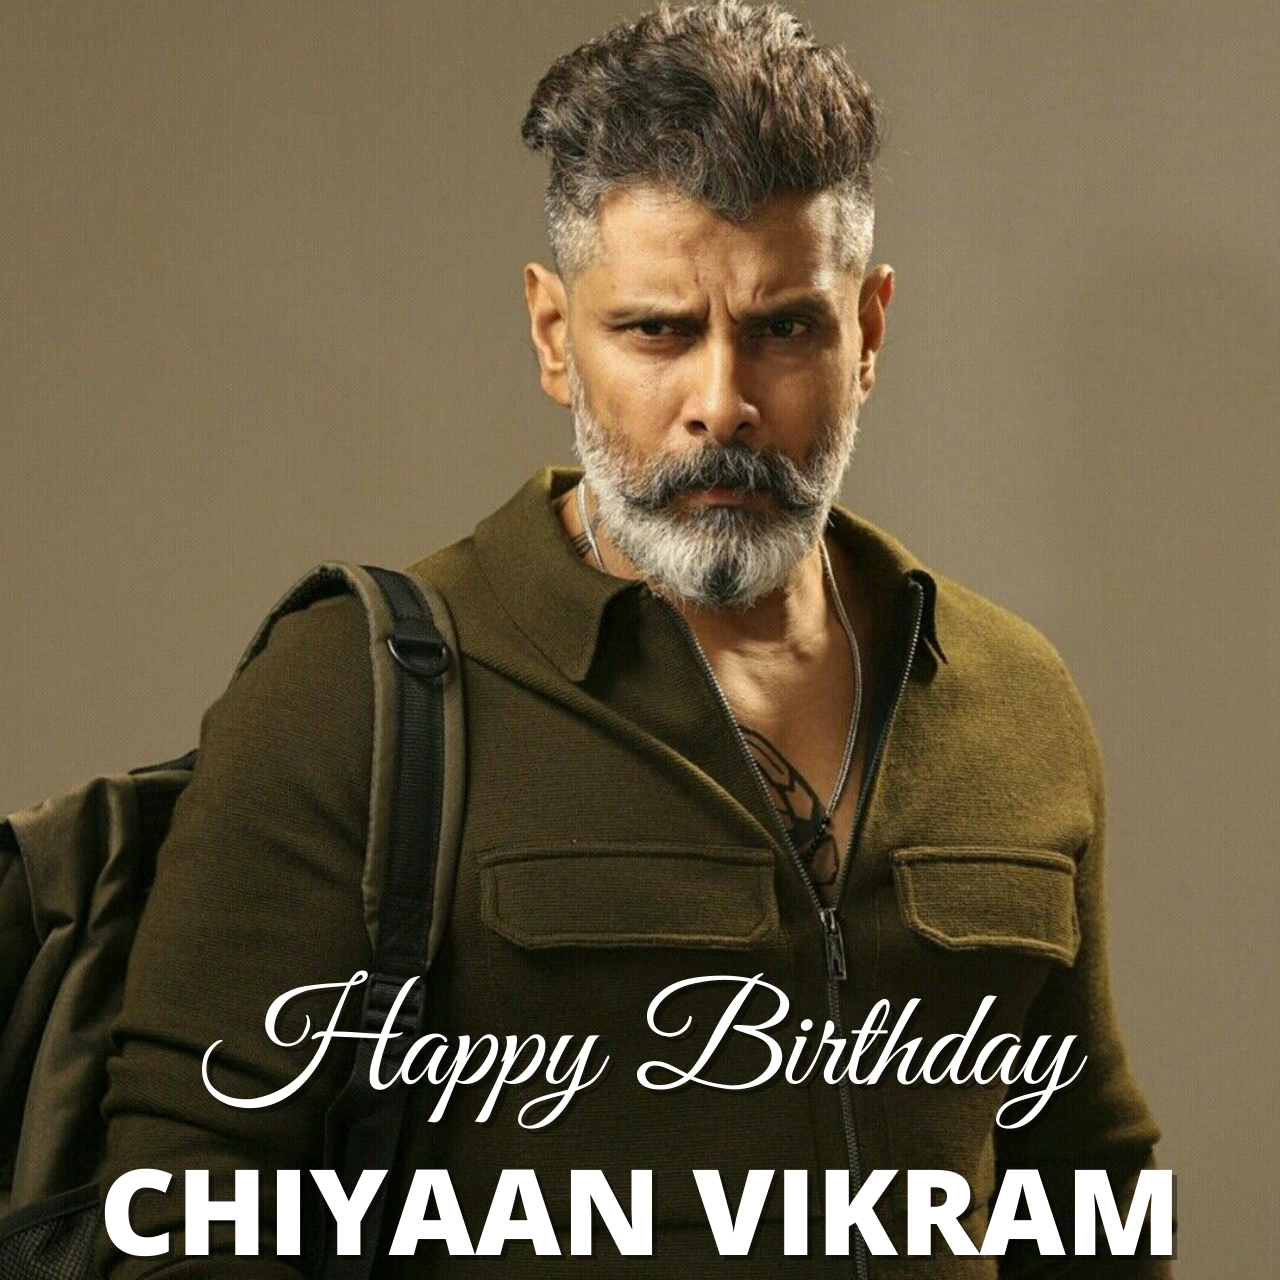 Happy Birthday Chiyaan Vikram: Image (Photos) Wishes, Messages, and video to Share with your Favourite Superstar